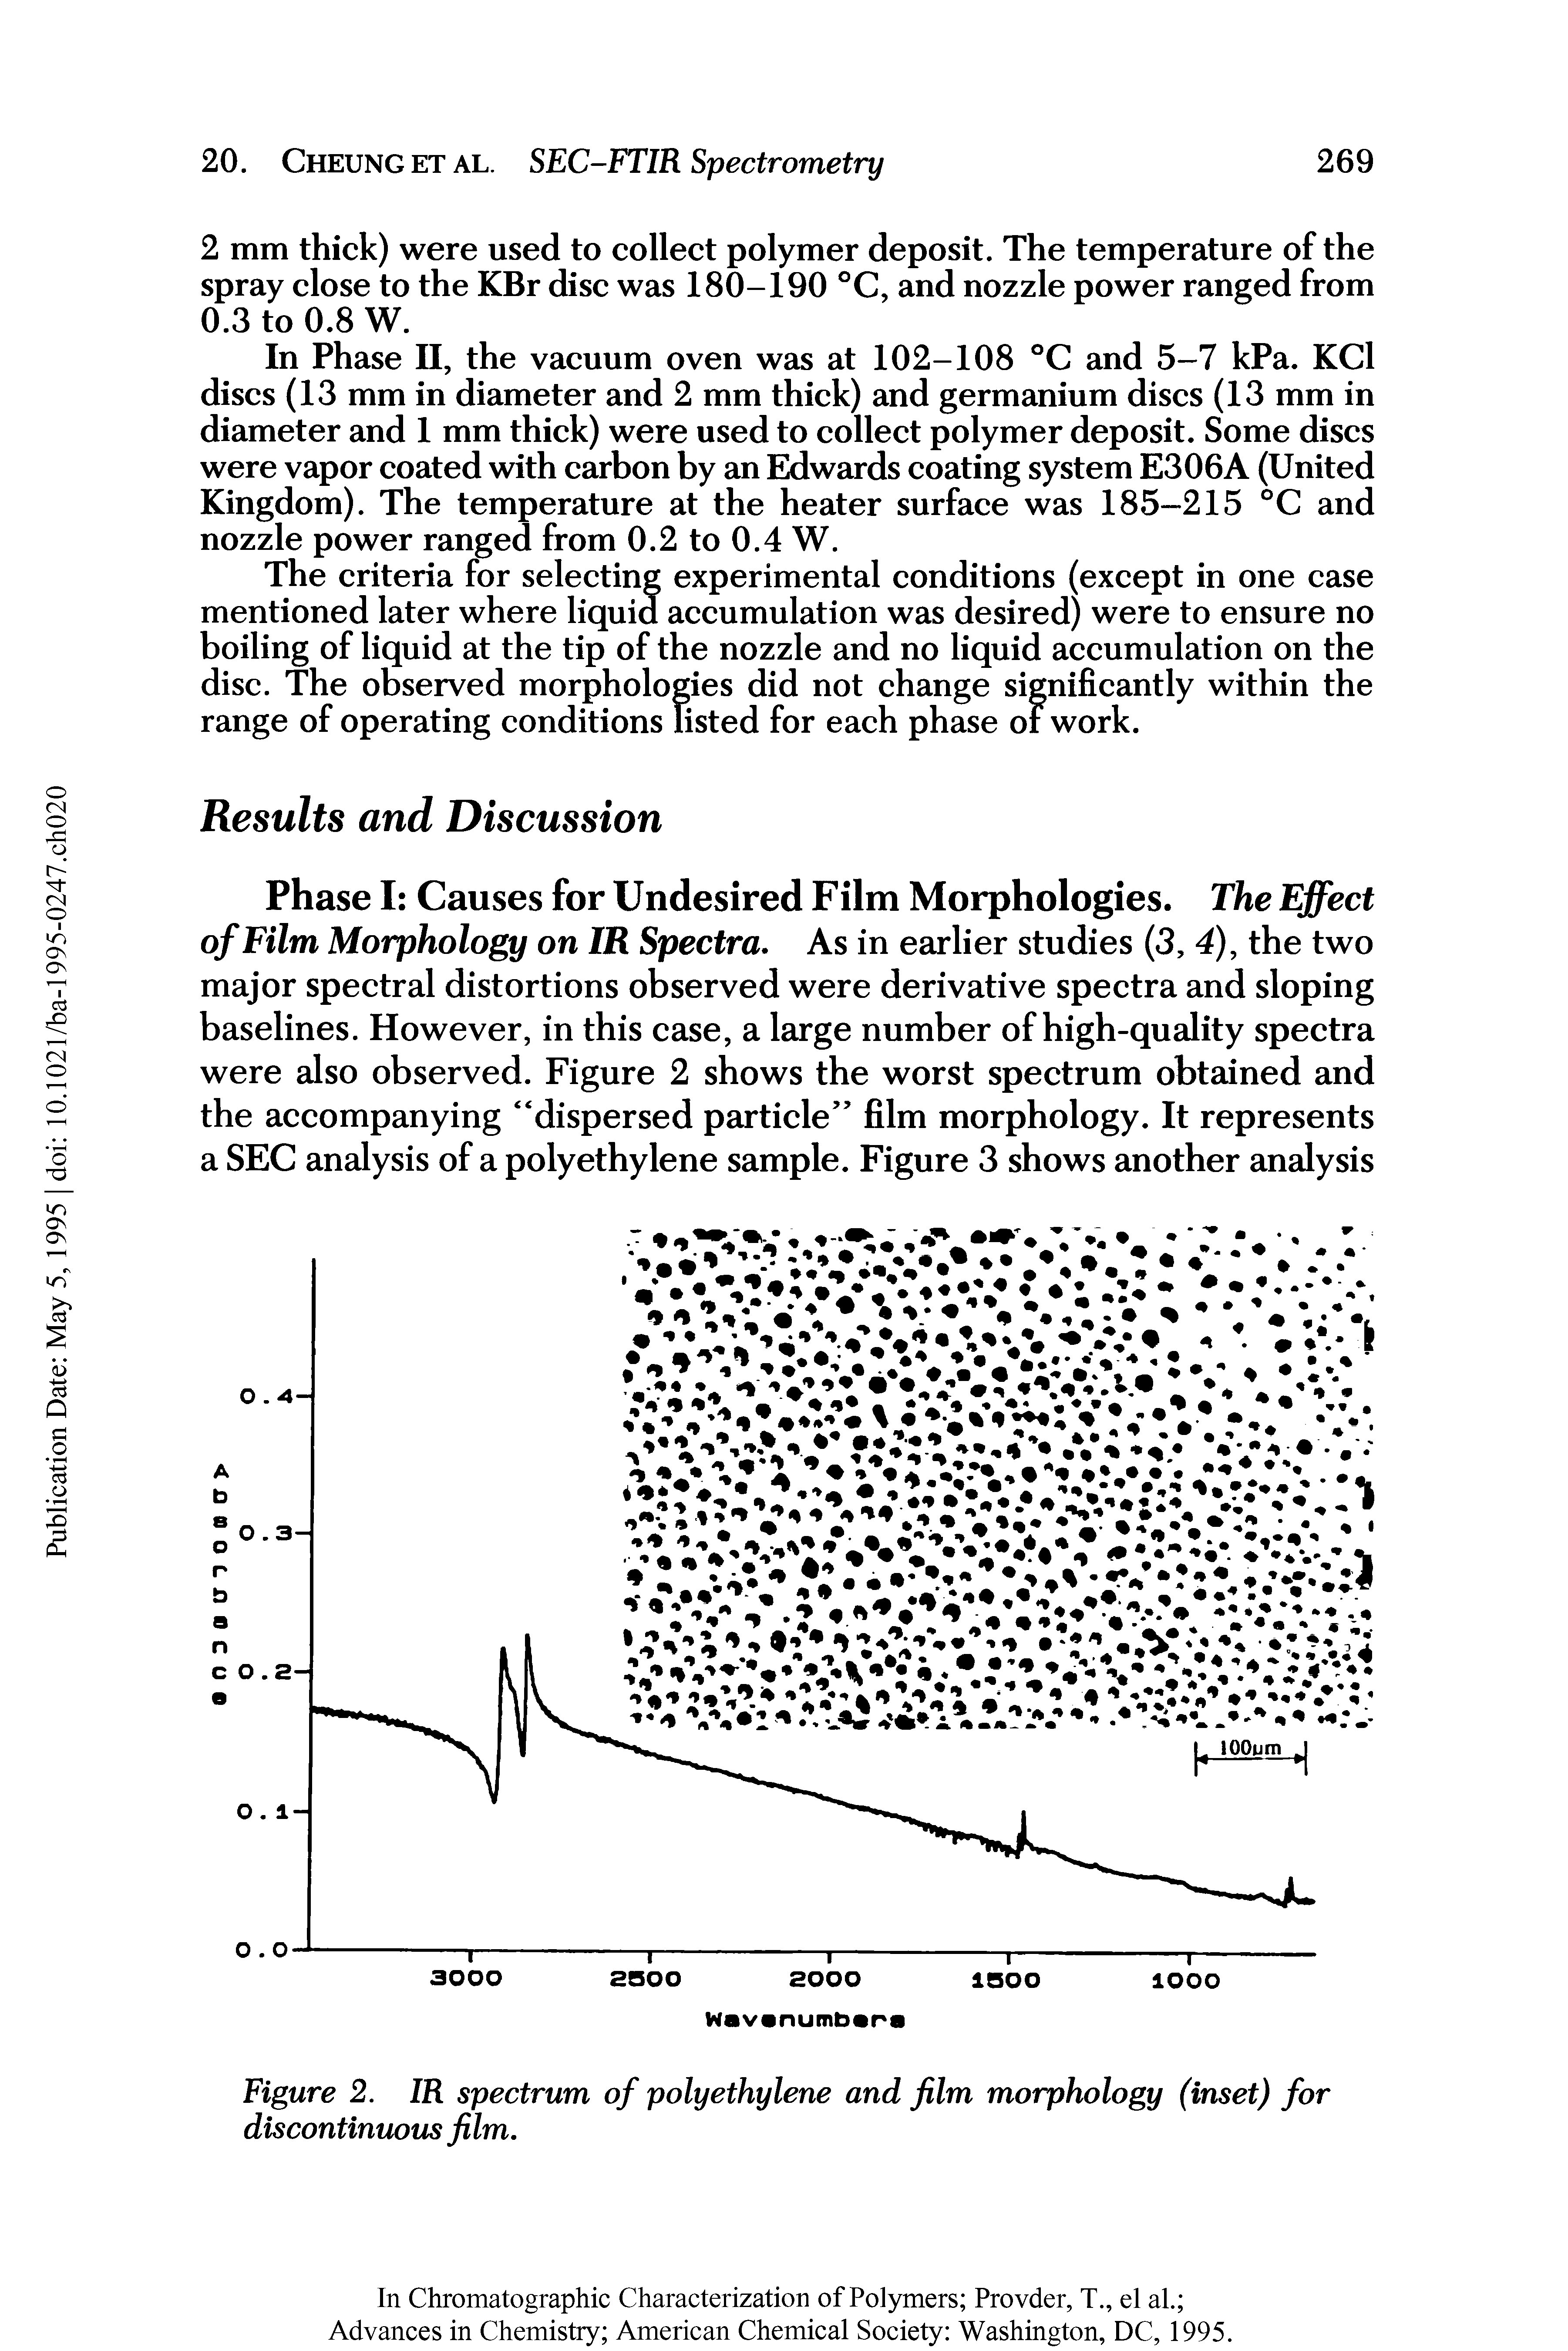 Figure 2. IR spectrum of polyethylene and film morphology (inset) for discontinuous film.